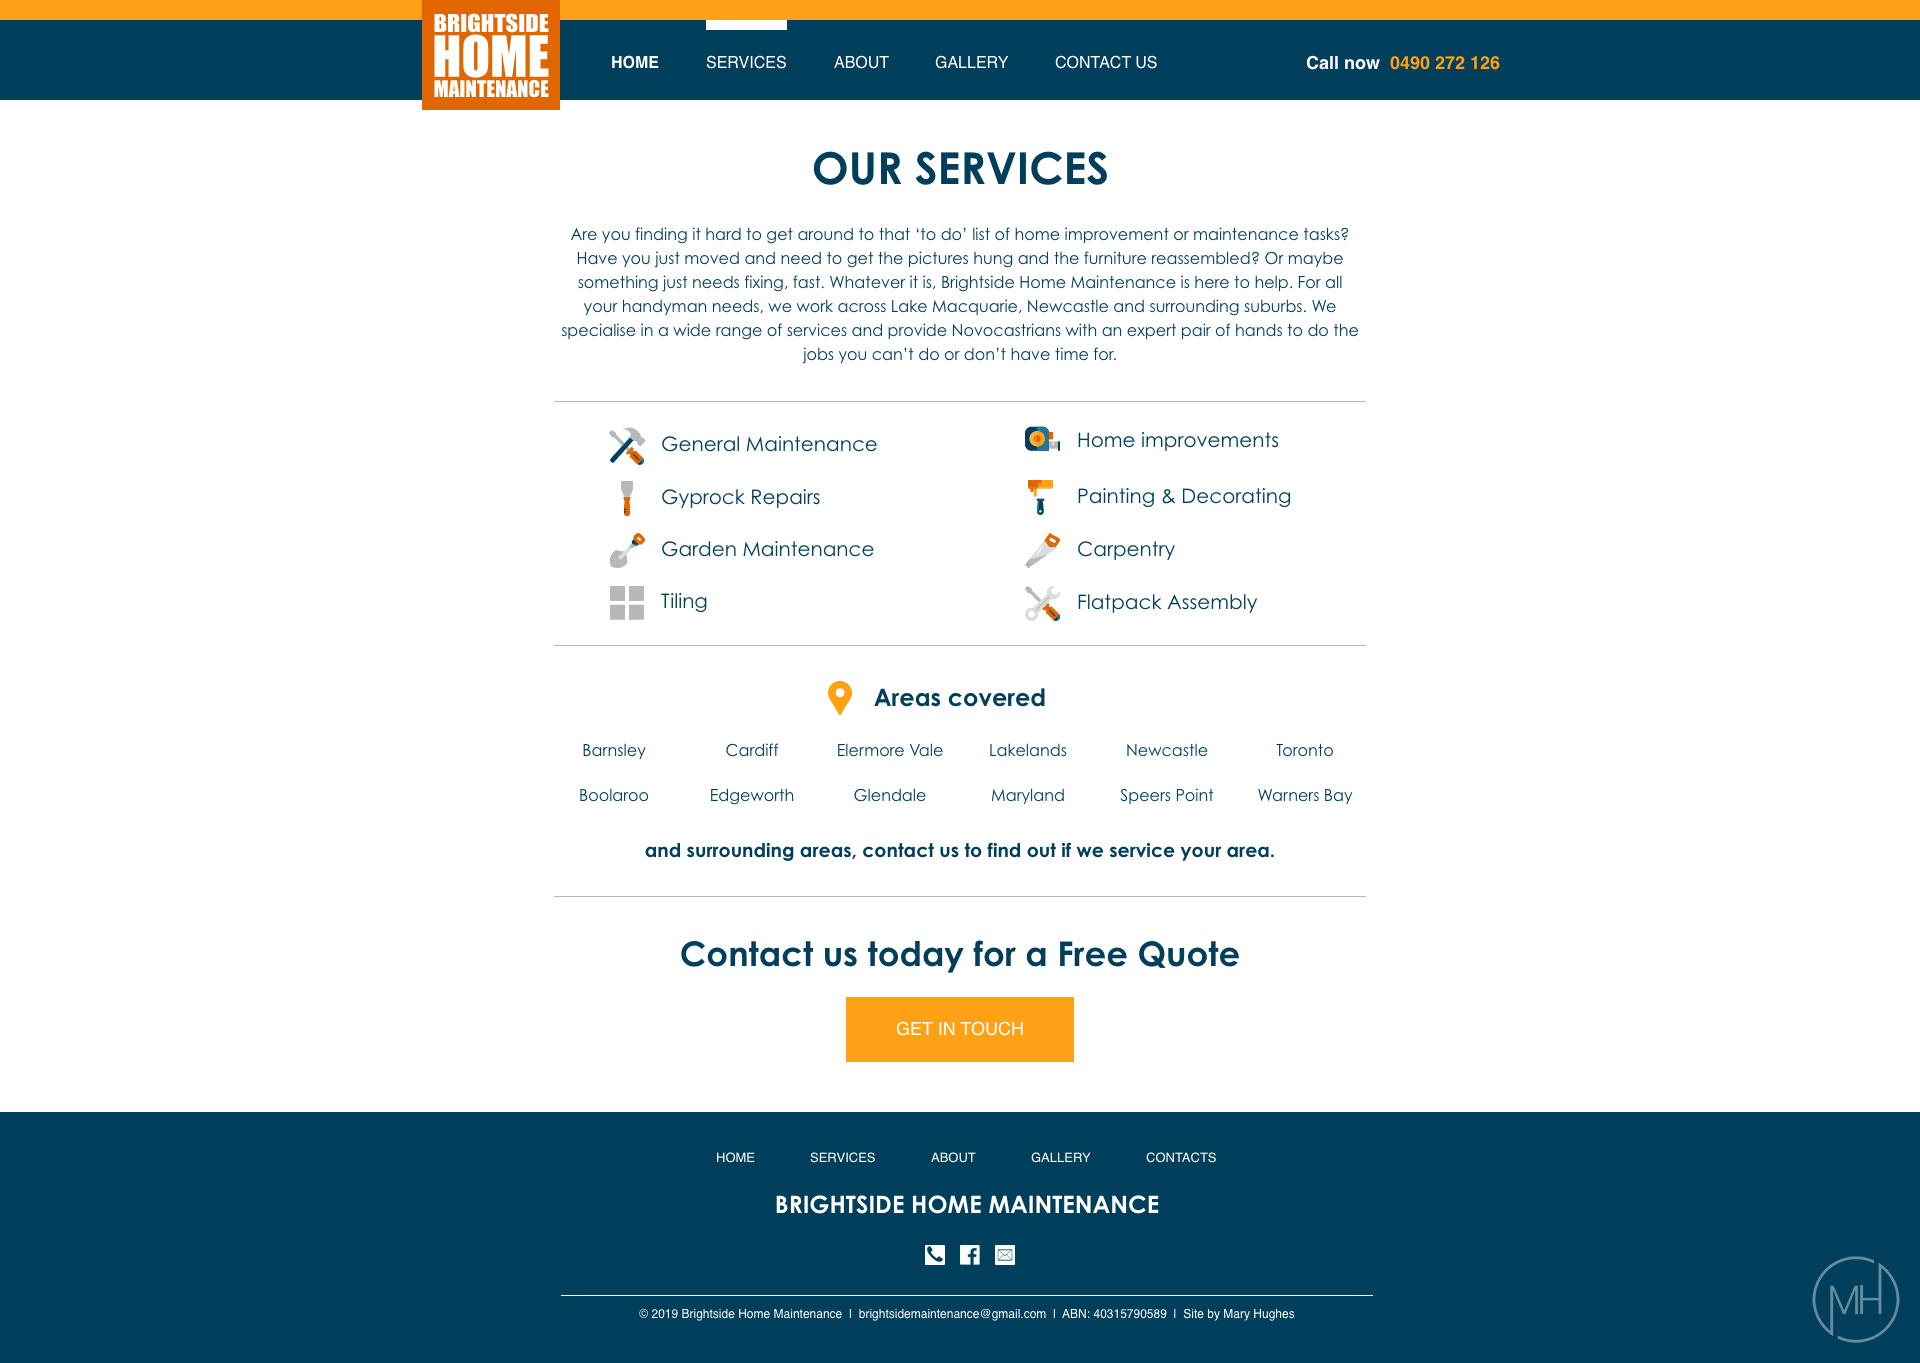 Services page